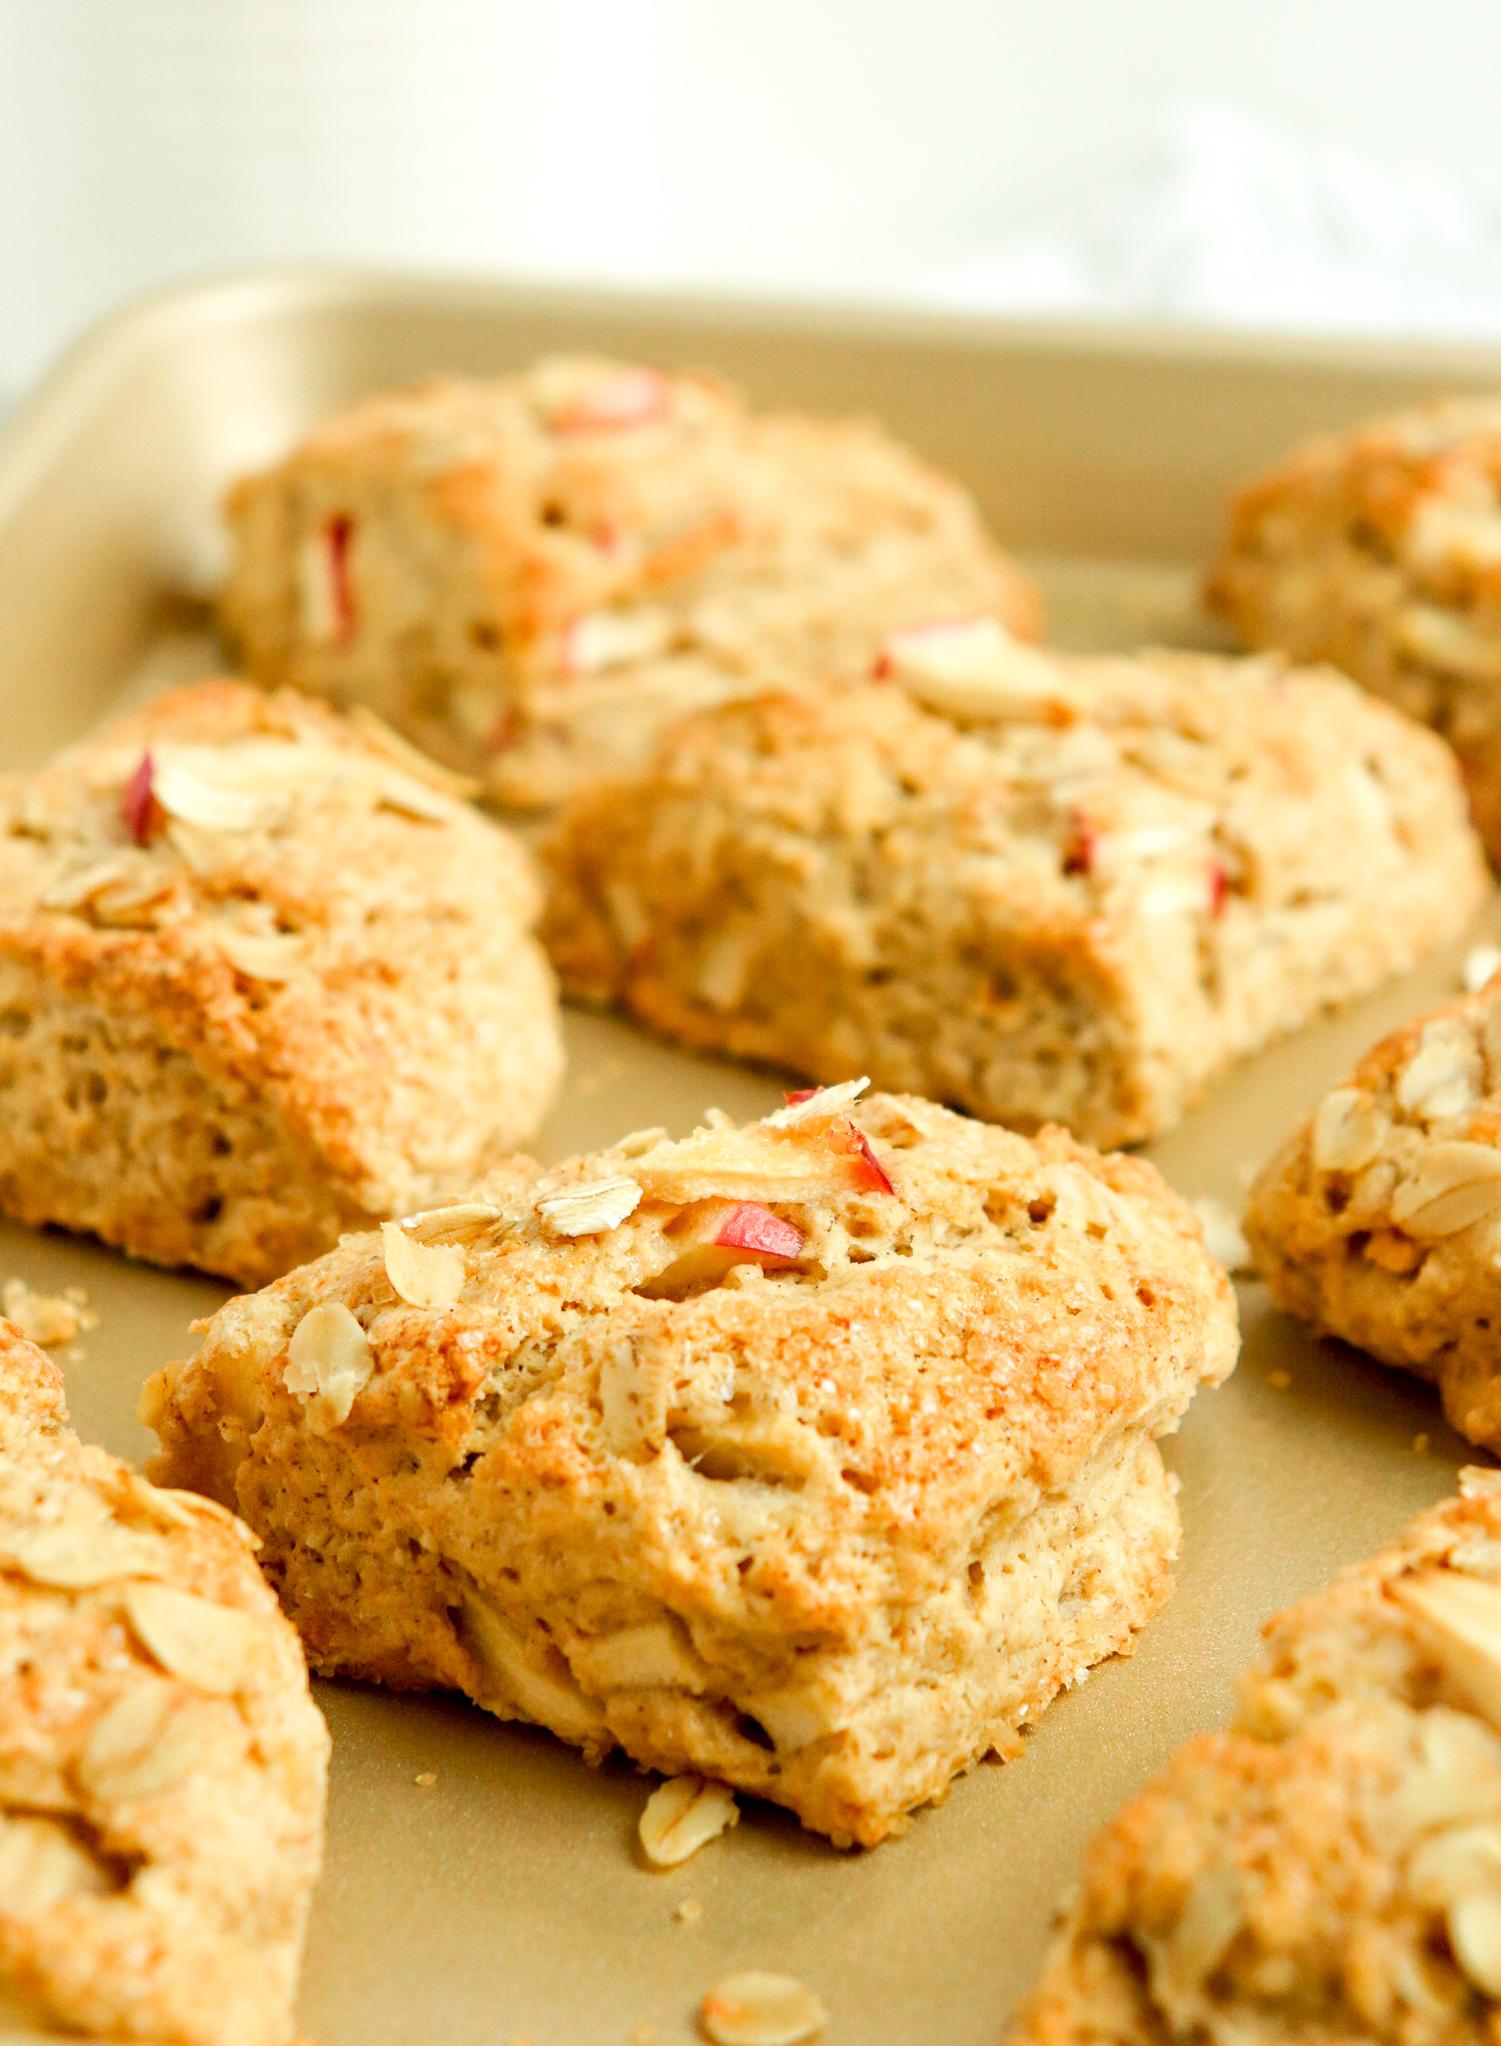  Rise and shine! Freshly baked orange oatmeal scones to start your day on a sweet note.